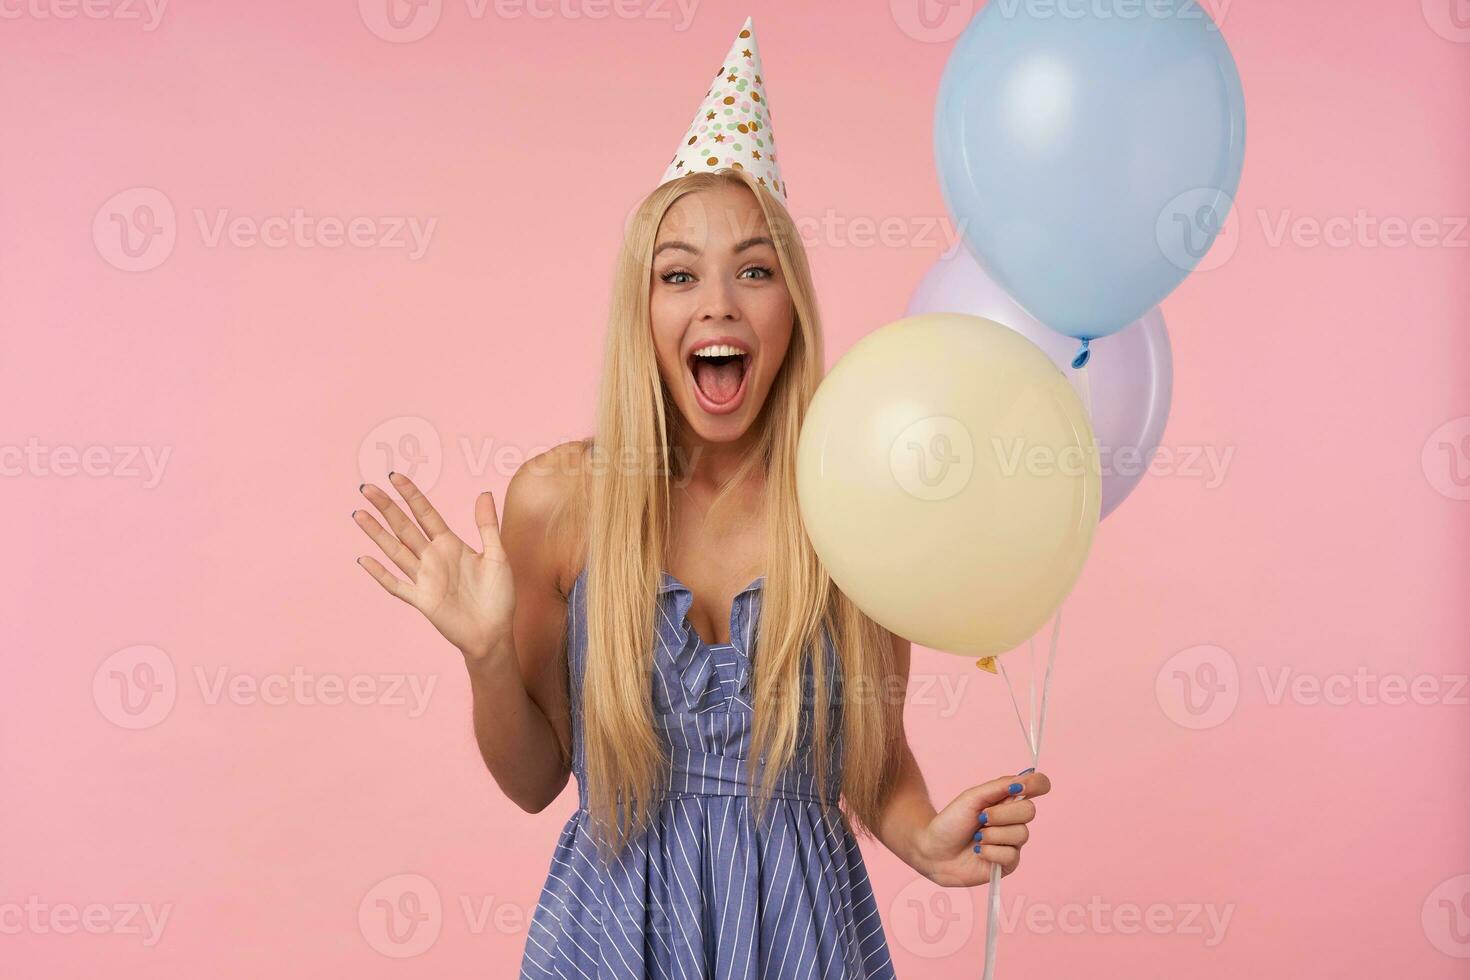 Overjoyed pretty young long haired woman with blonde hair posing in multicolored air balloons, wearing blue summer dress and birthday cap, being amused by guests while celebrating holiday photo